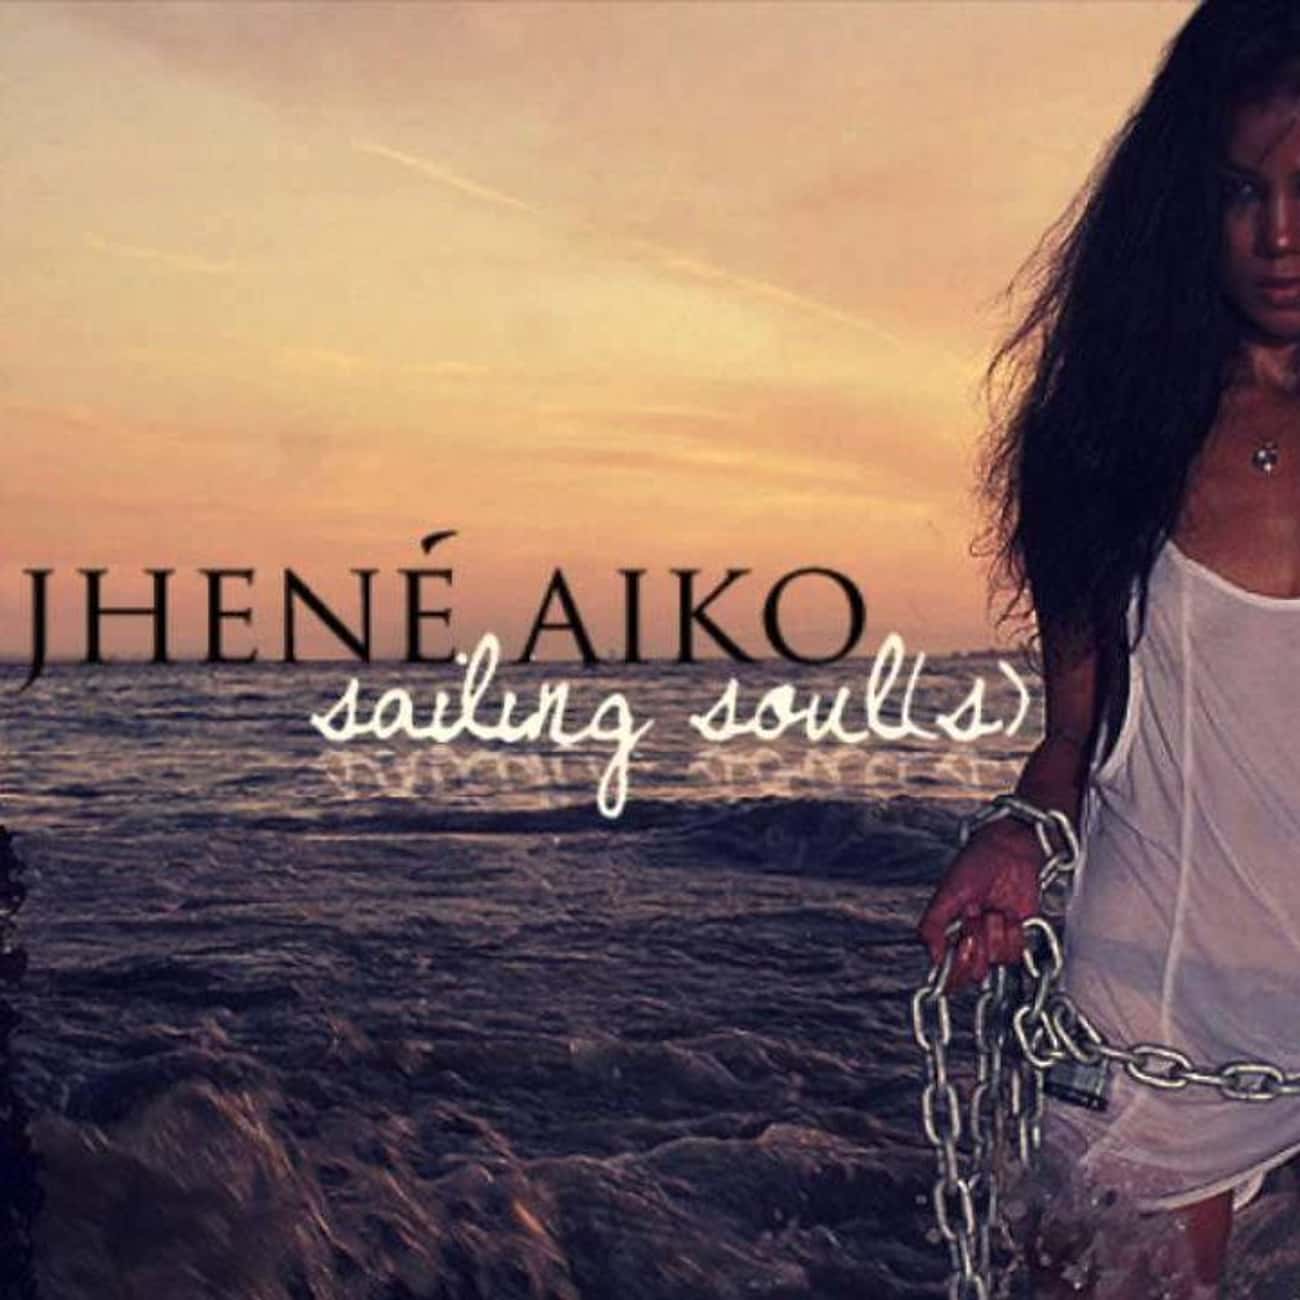 Ranking All 4 Jhené Aiko Albums, Best To Worst